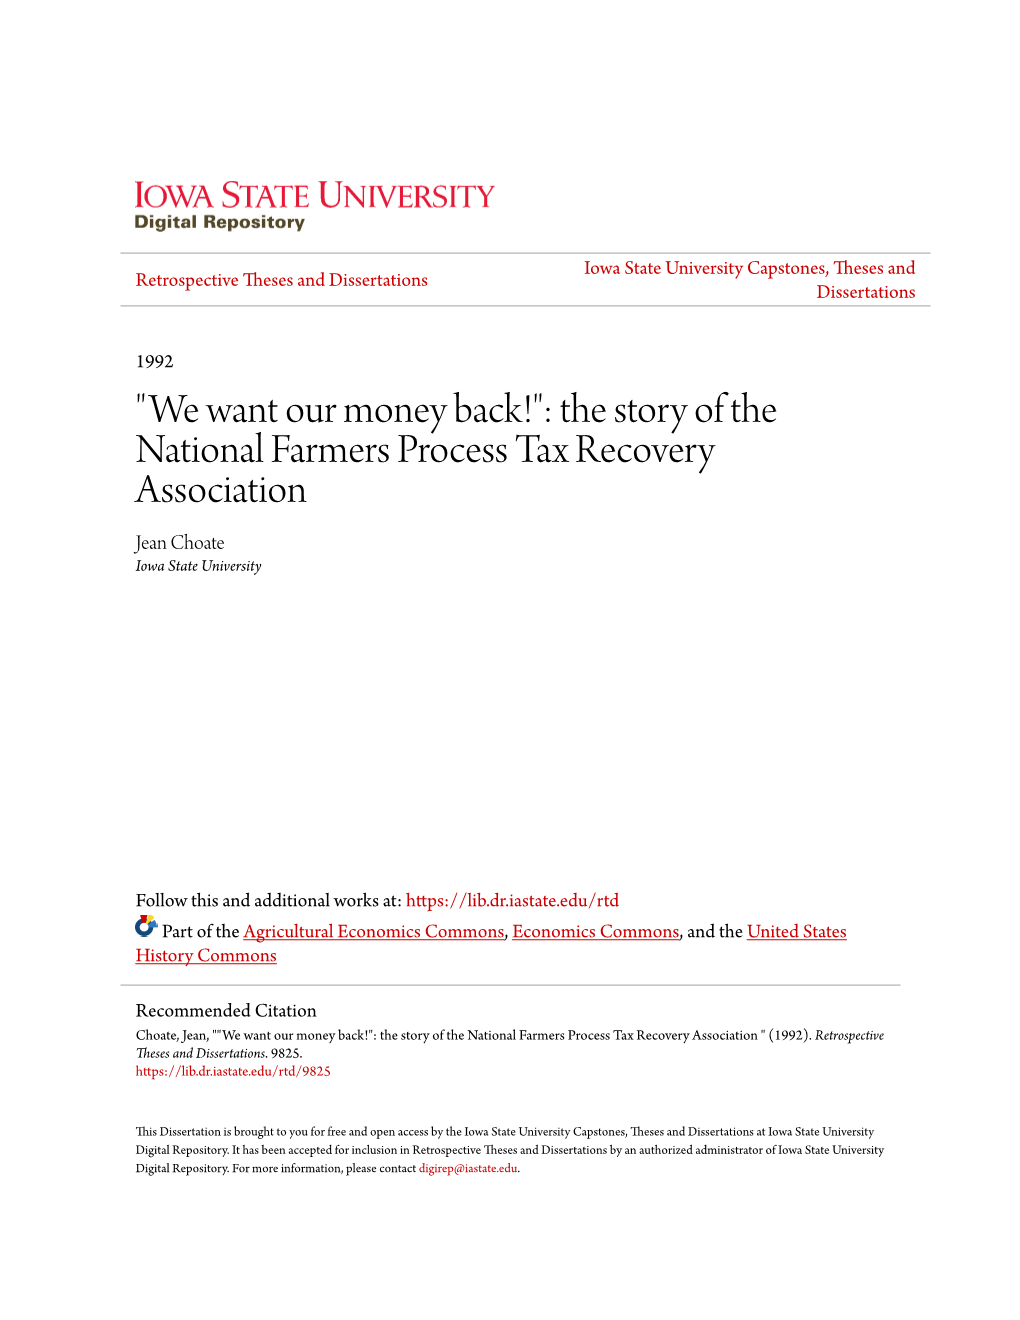 "We Want Our Money Back!": the Story of the National Farmers Process Tax Recovery Association Jean Choate Iowa State University